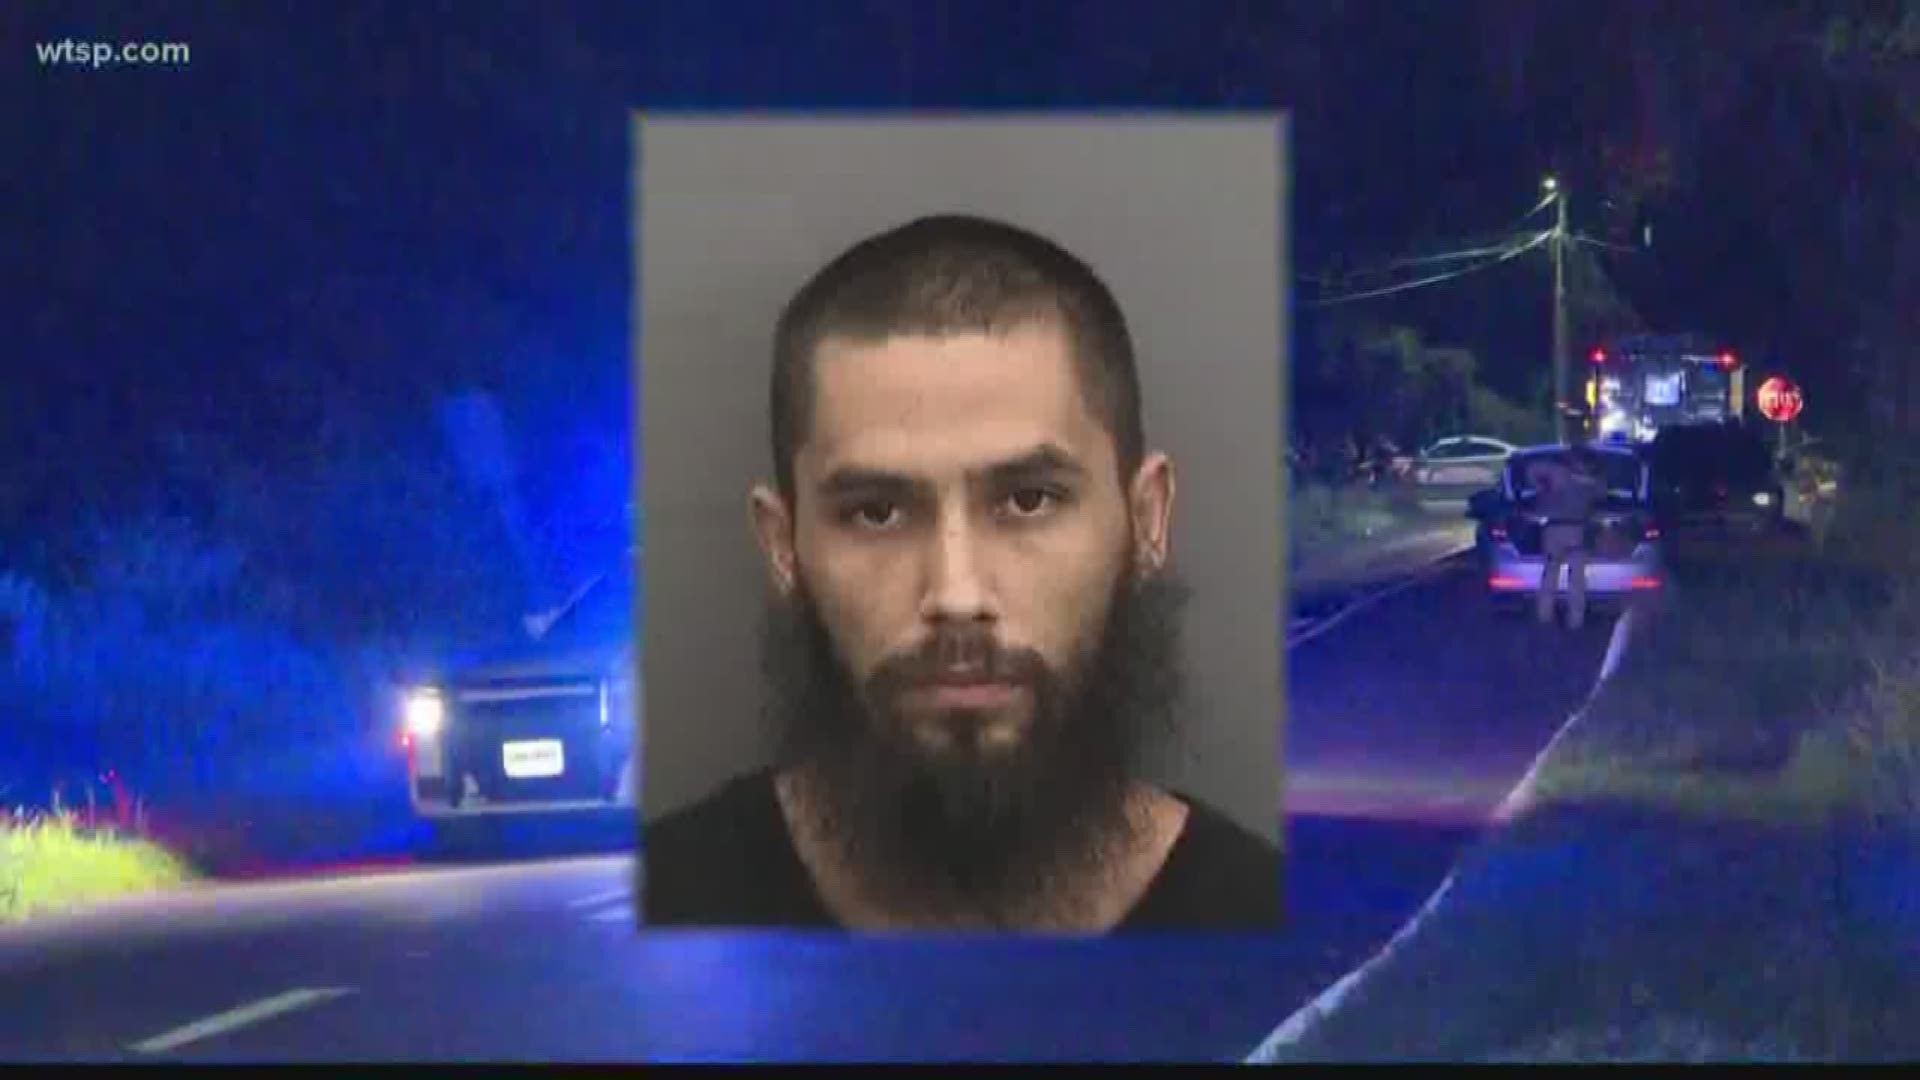 He was fighting with a man before he barricaded himself inside, but was since taken into custody, deputies say.